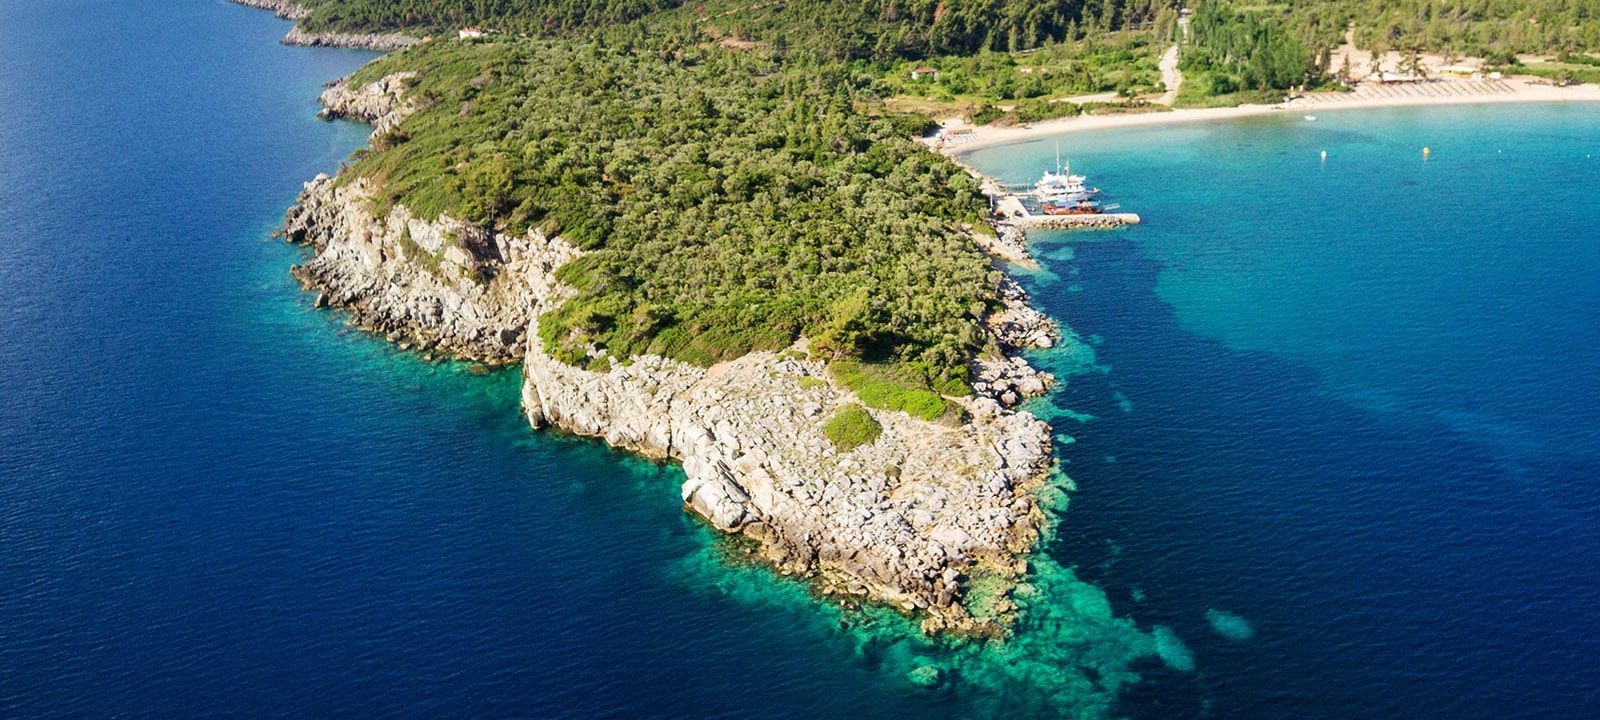 The destination of Halkidiki for an excursion with Greek Adventures